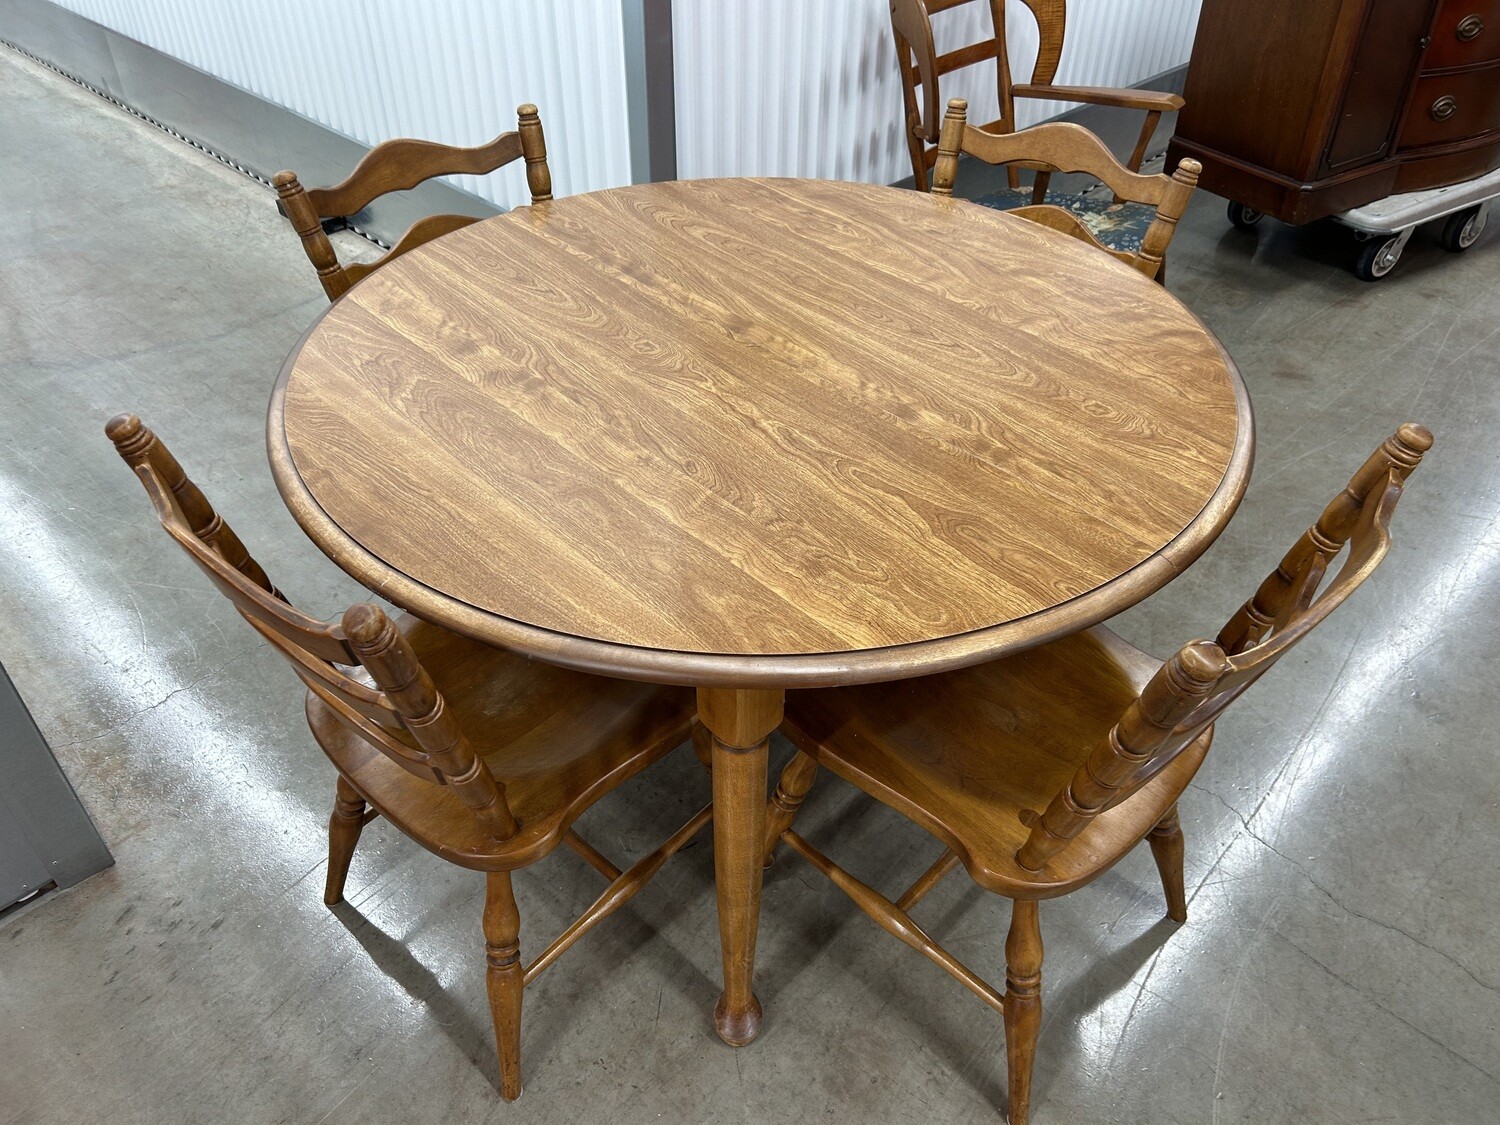 Vintage Maple Kitchen Table, 4 chairs, Cushman Colonial #2126 - took 4 mos. to sell, orig. price $145